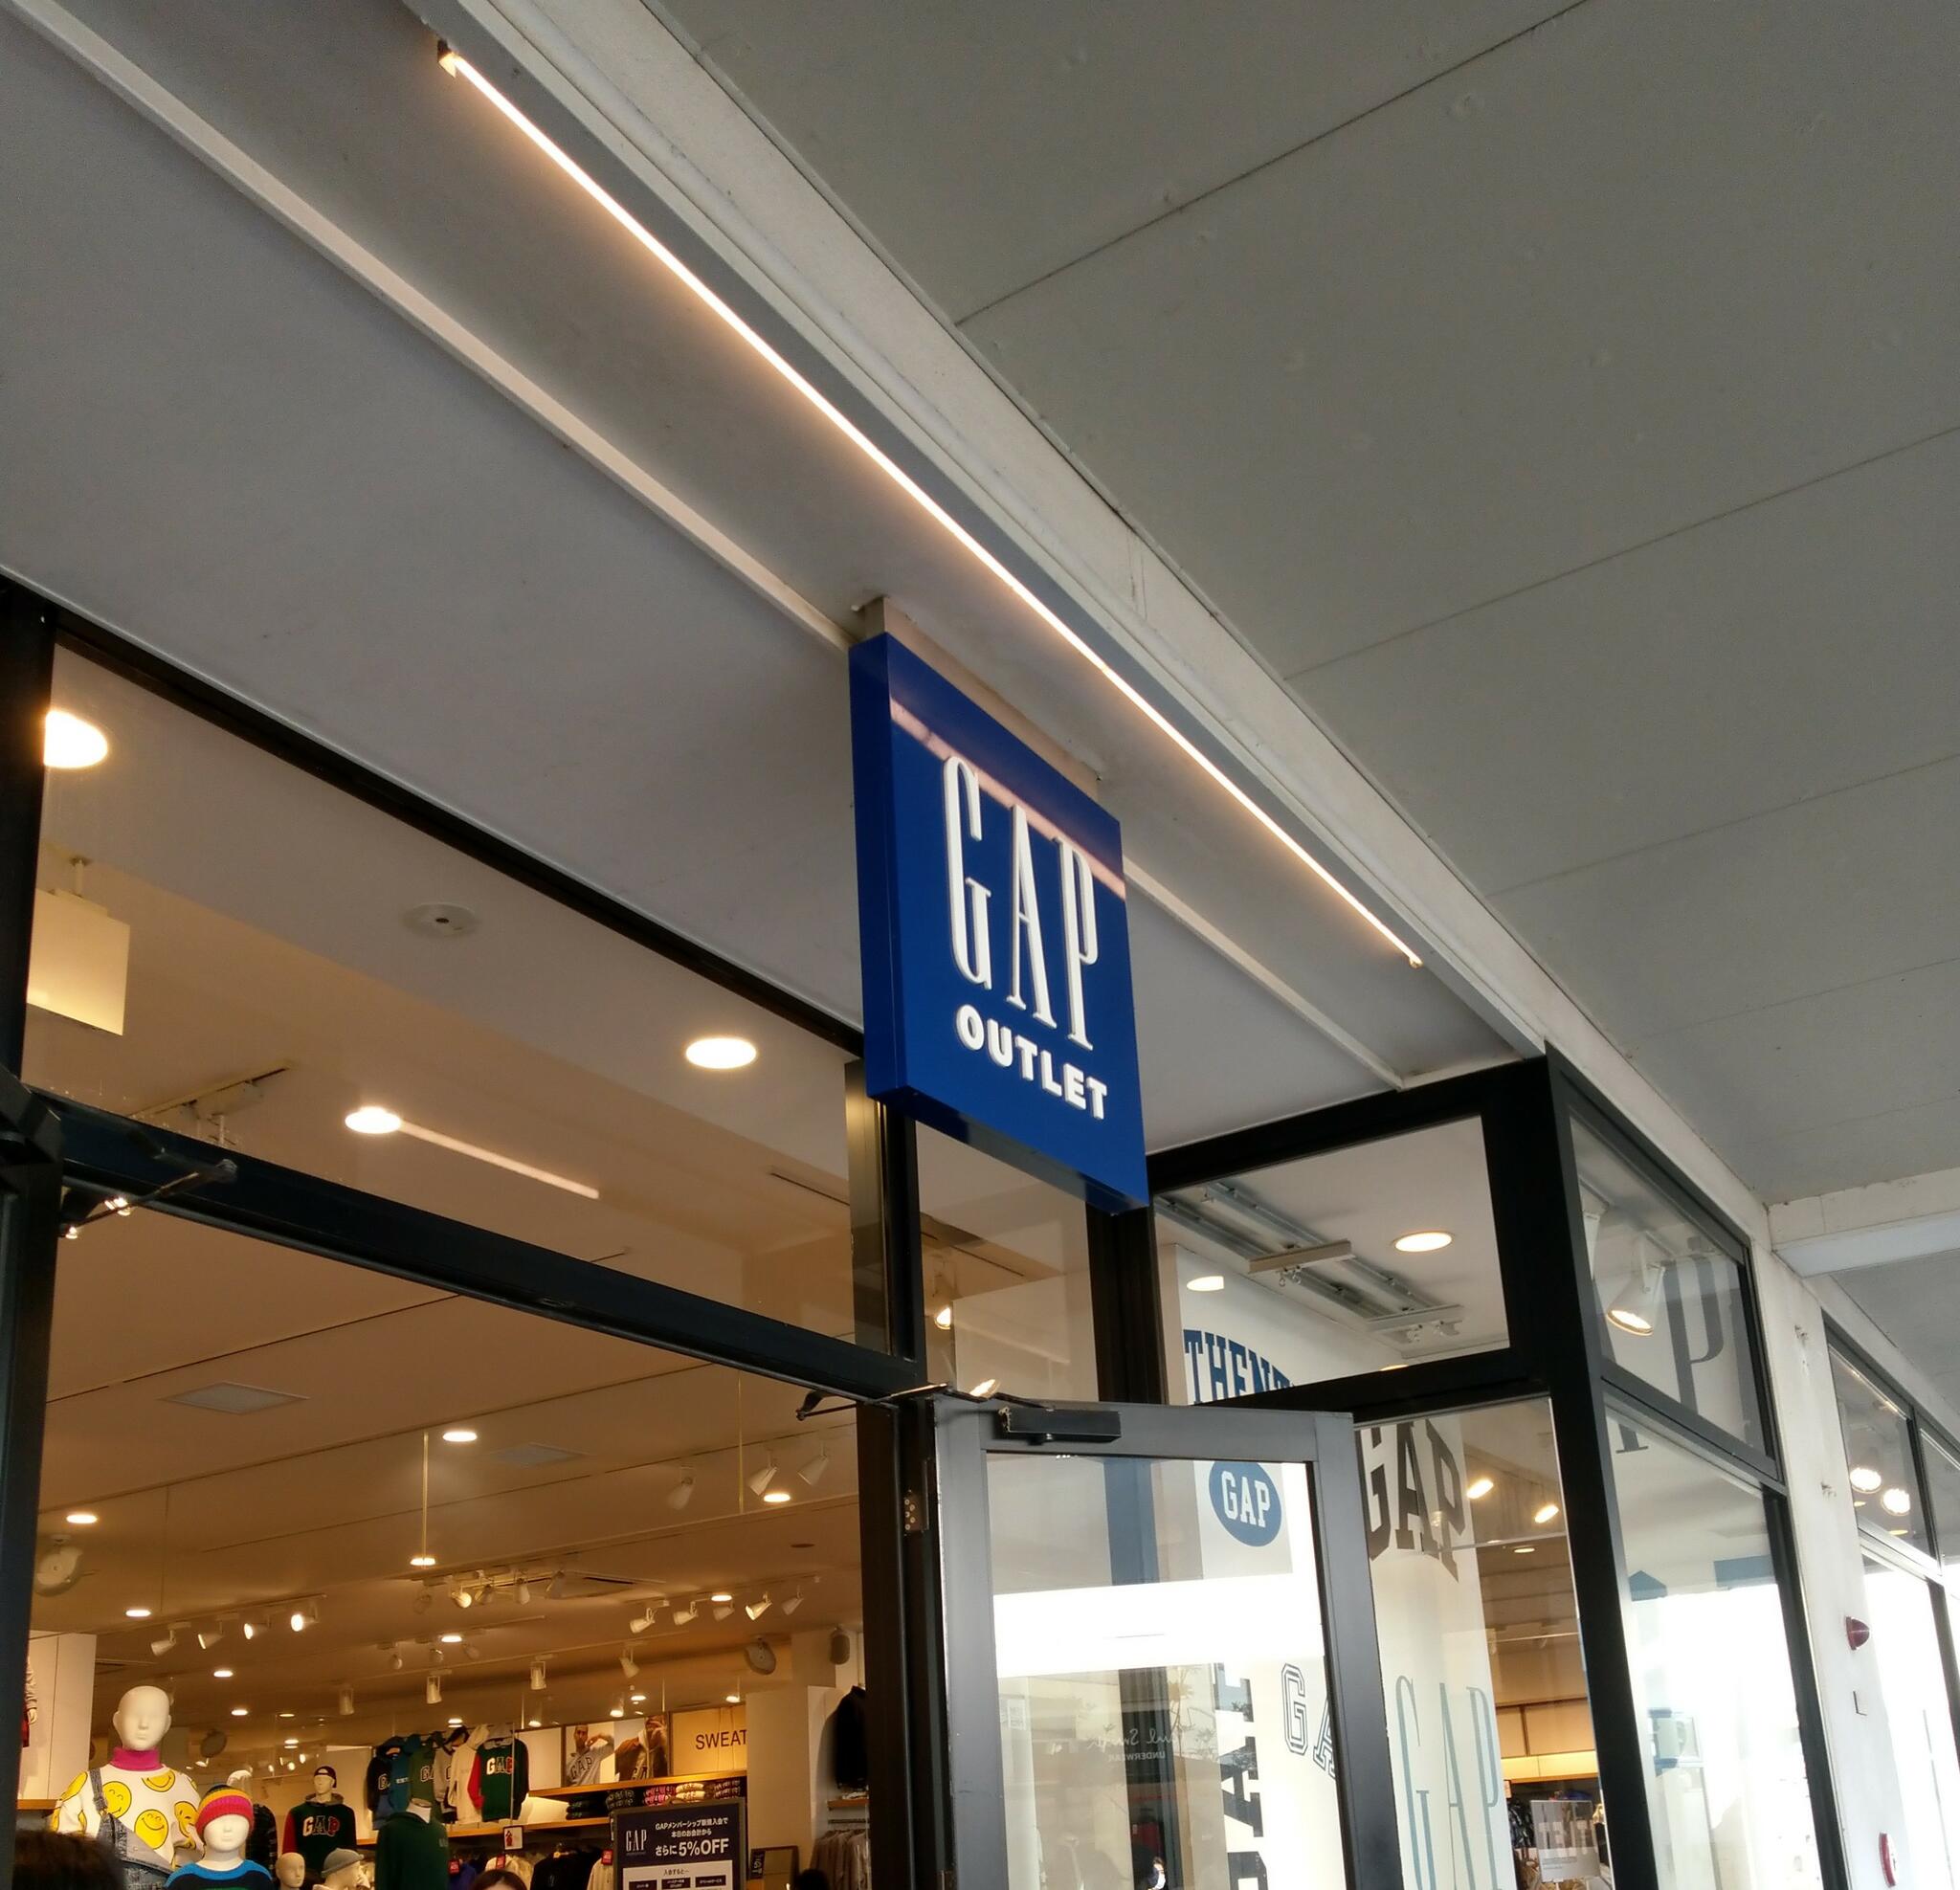 GAP Outlet 三井アウトレットパーク木更津店の代表写真8